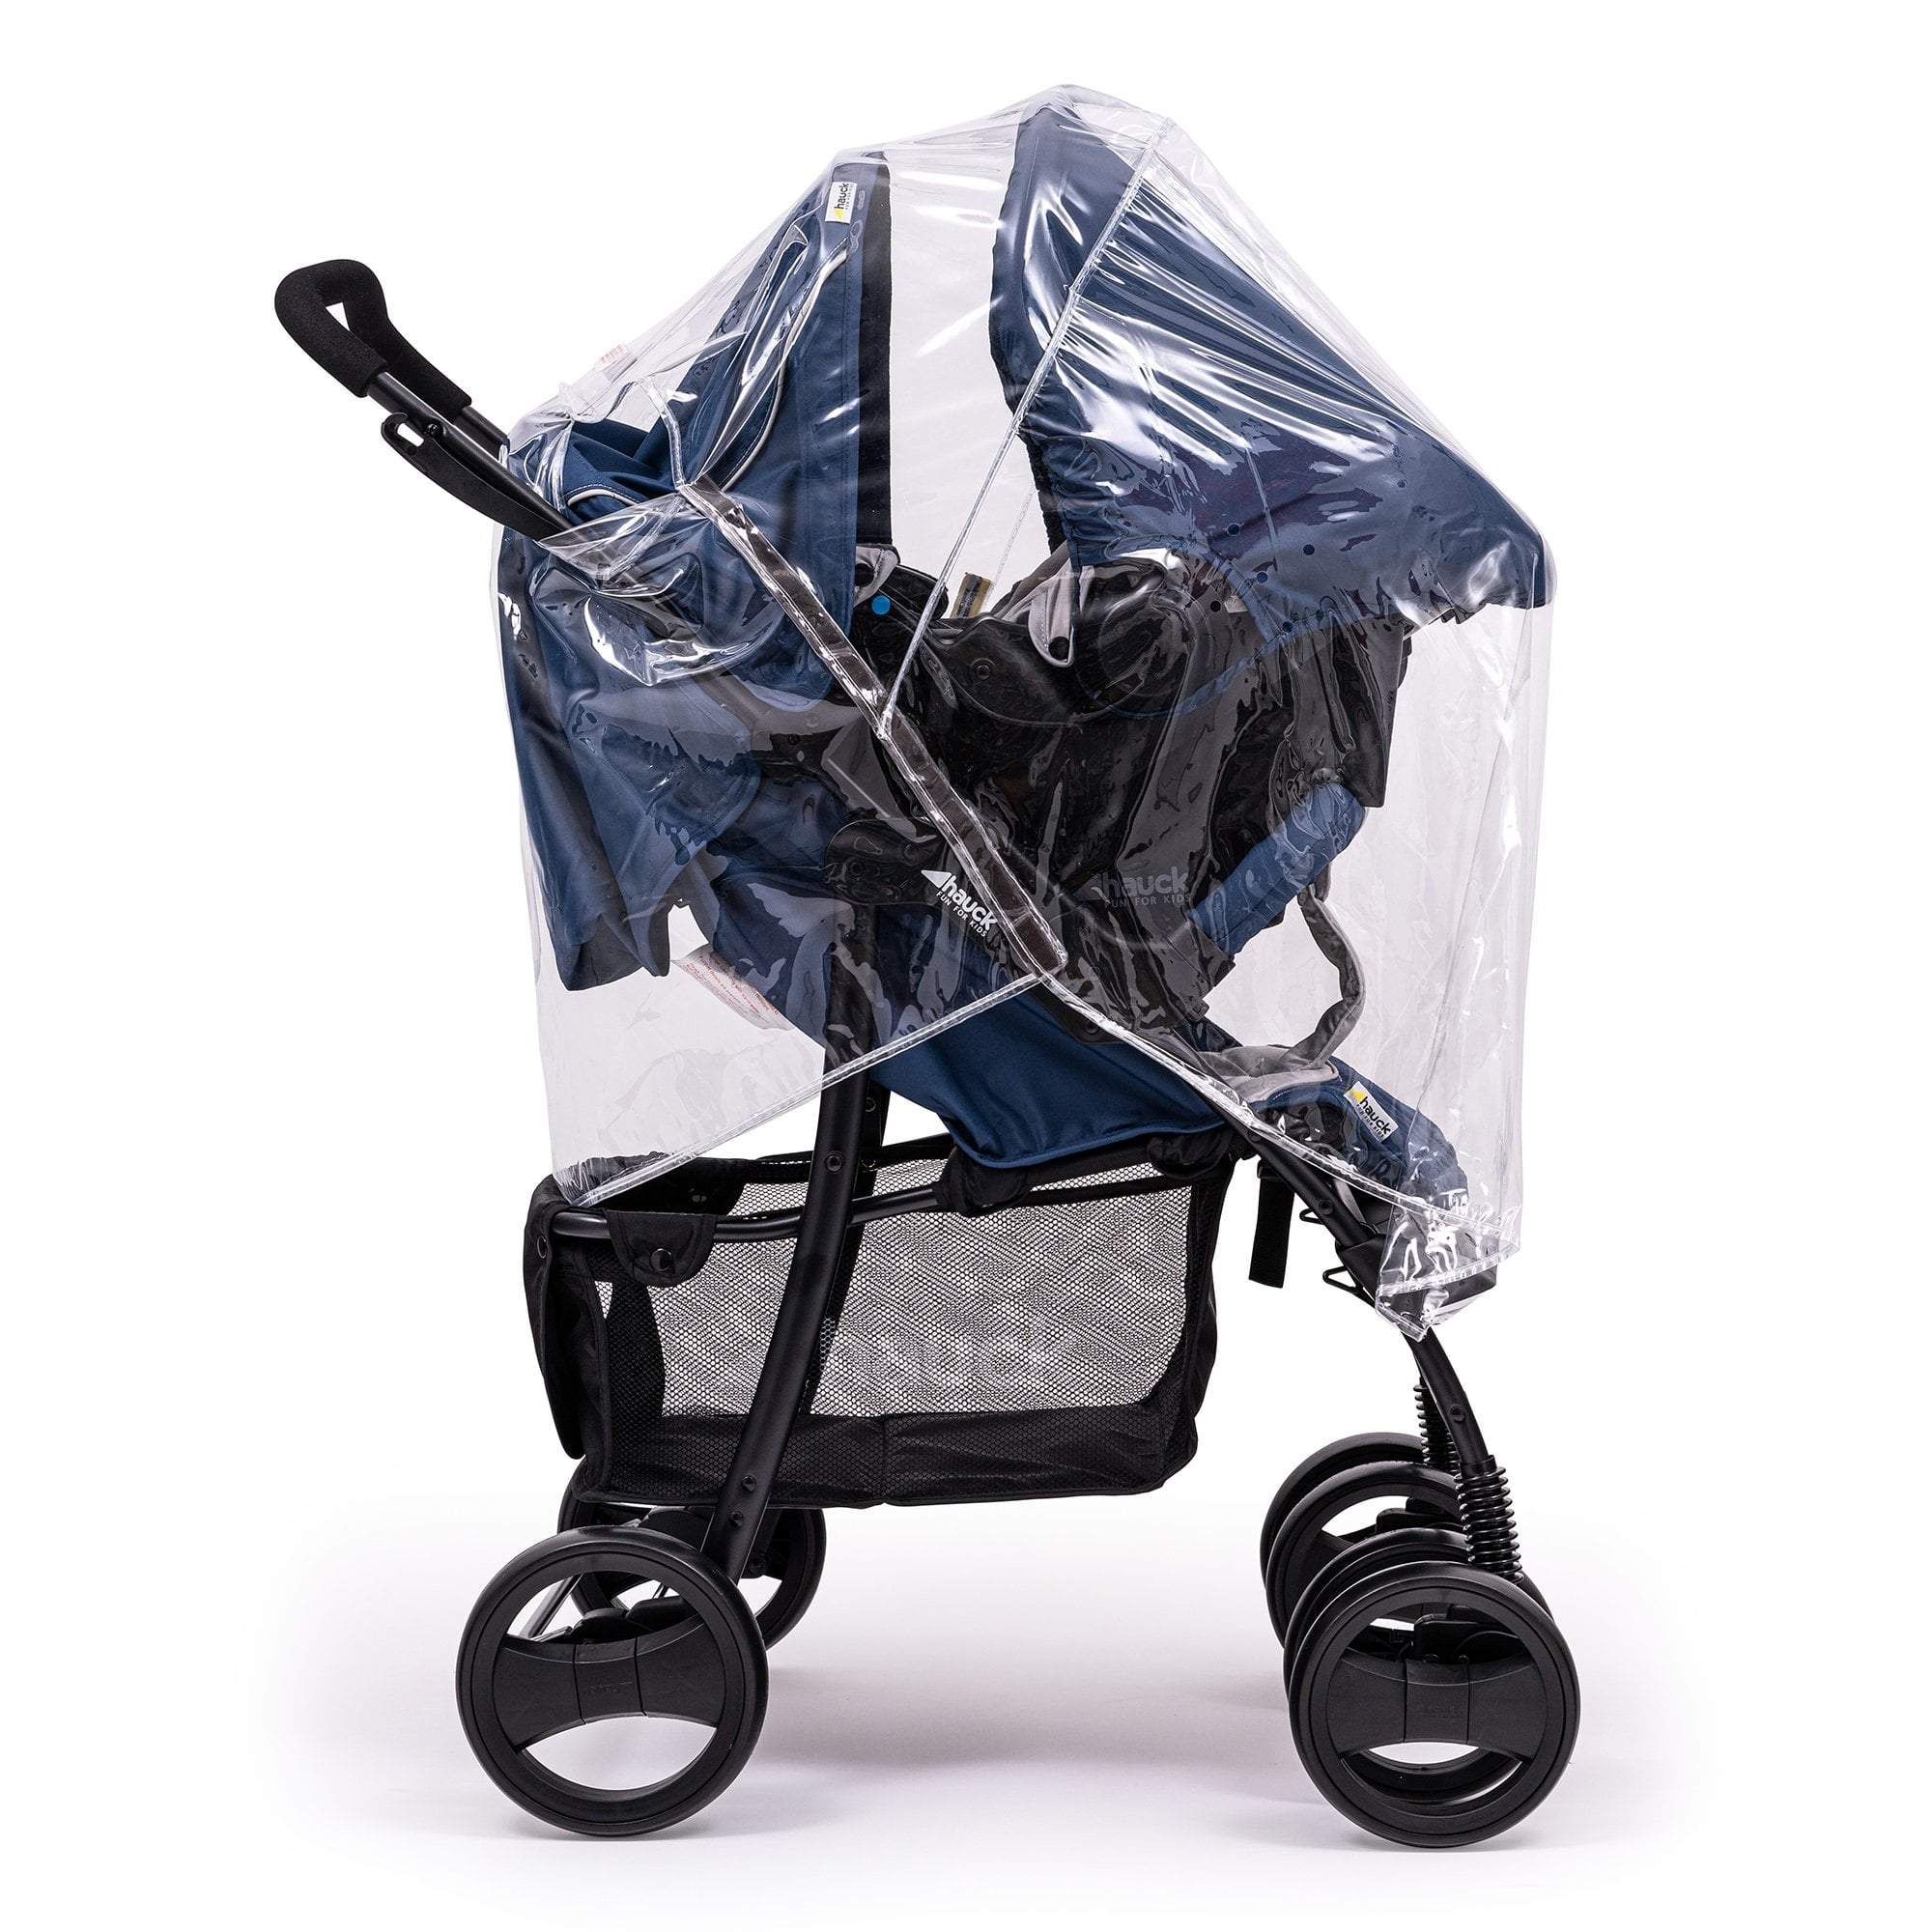 Travel System Raincover Compatible with BOB - Fits All Models - For Your Little One